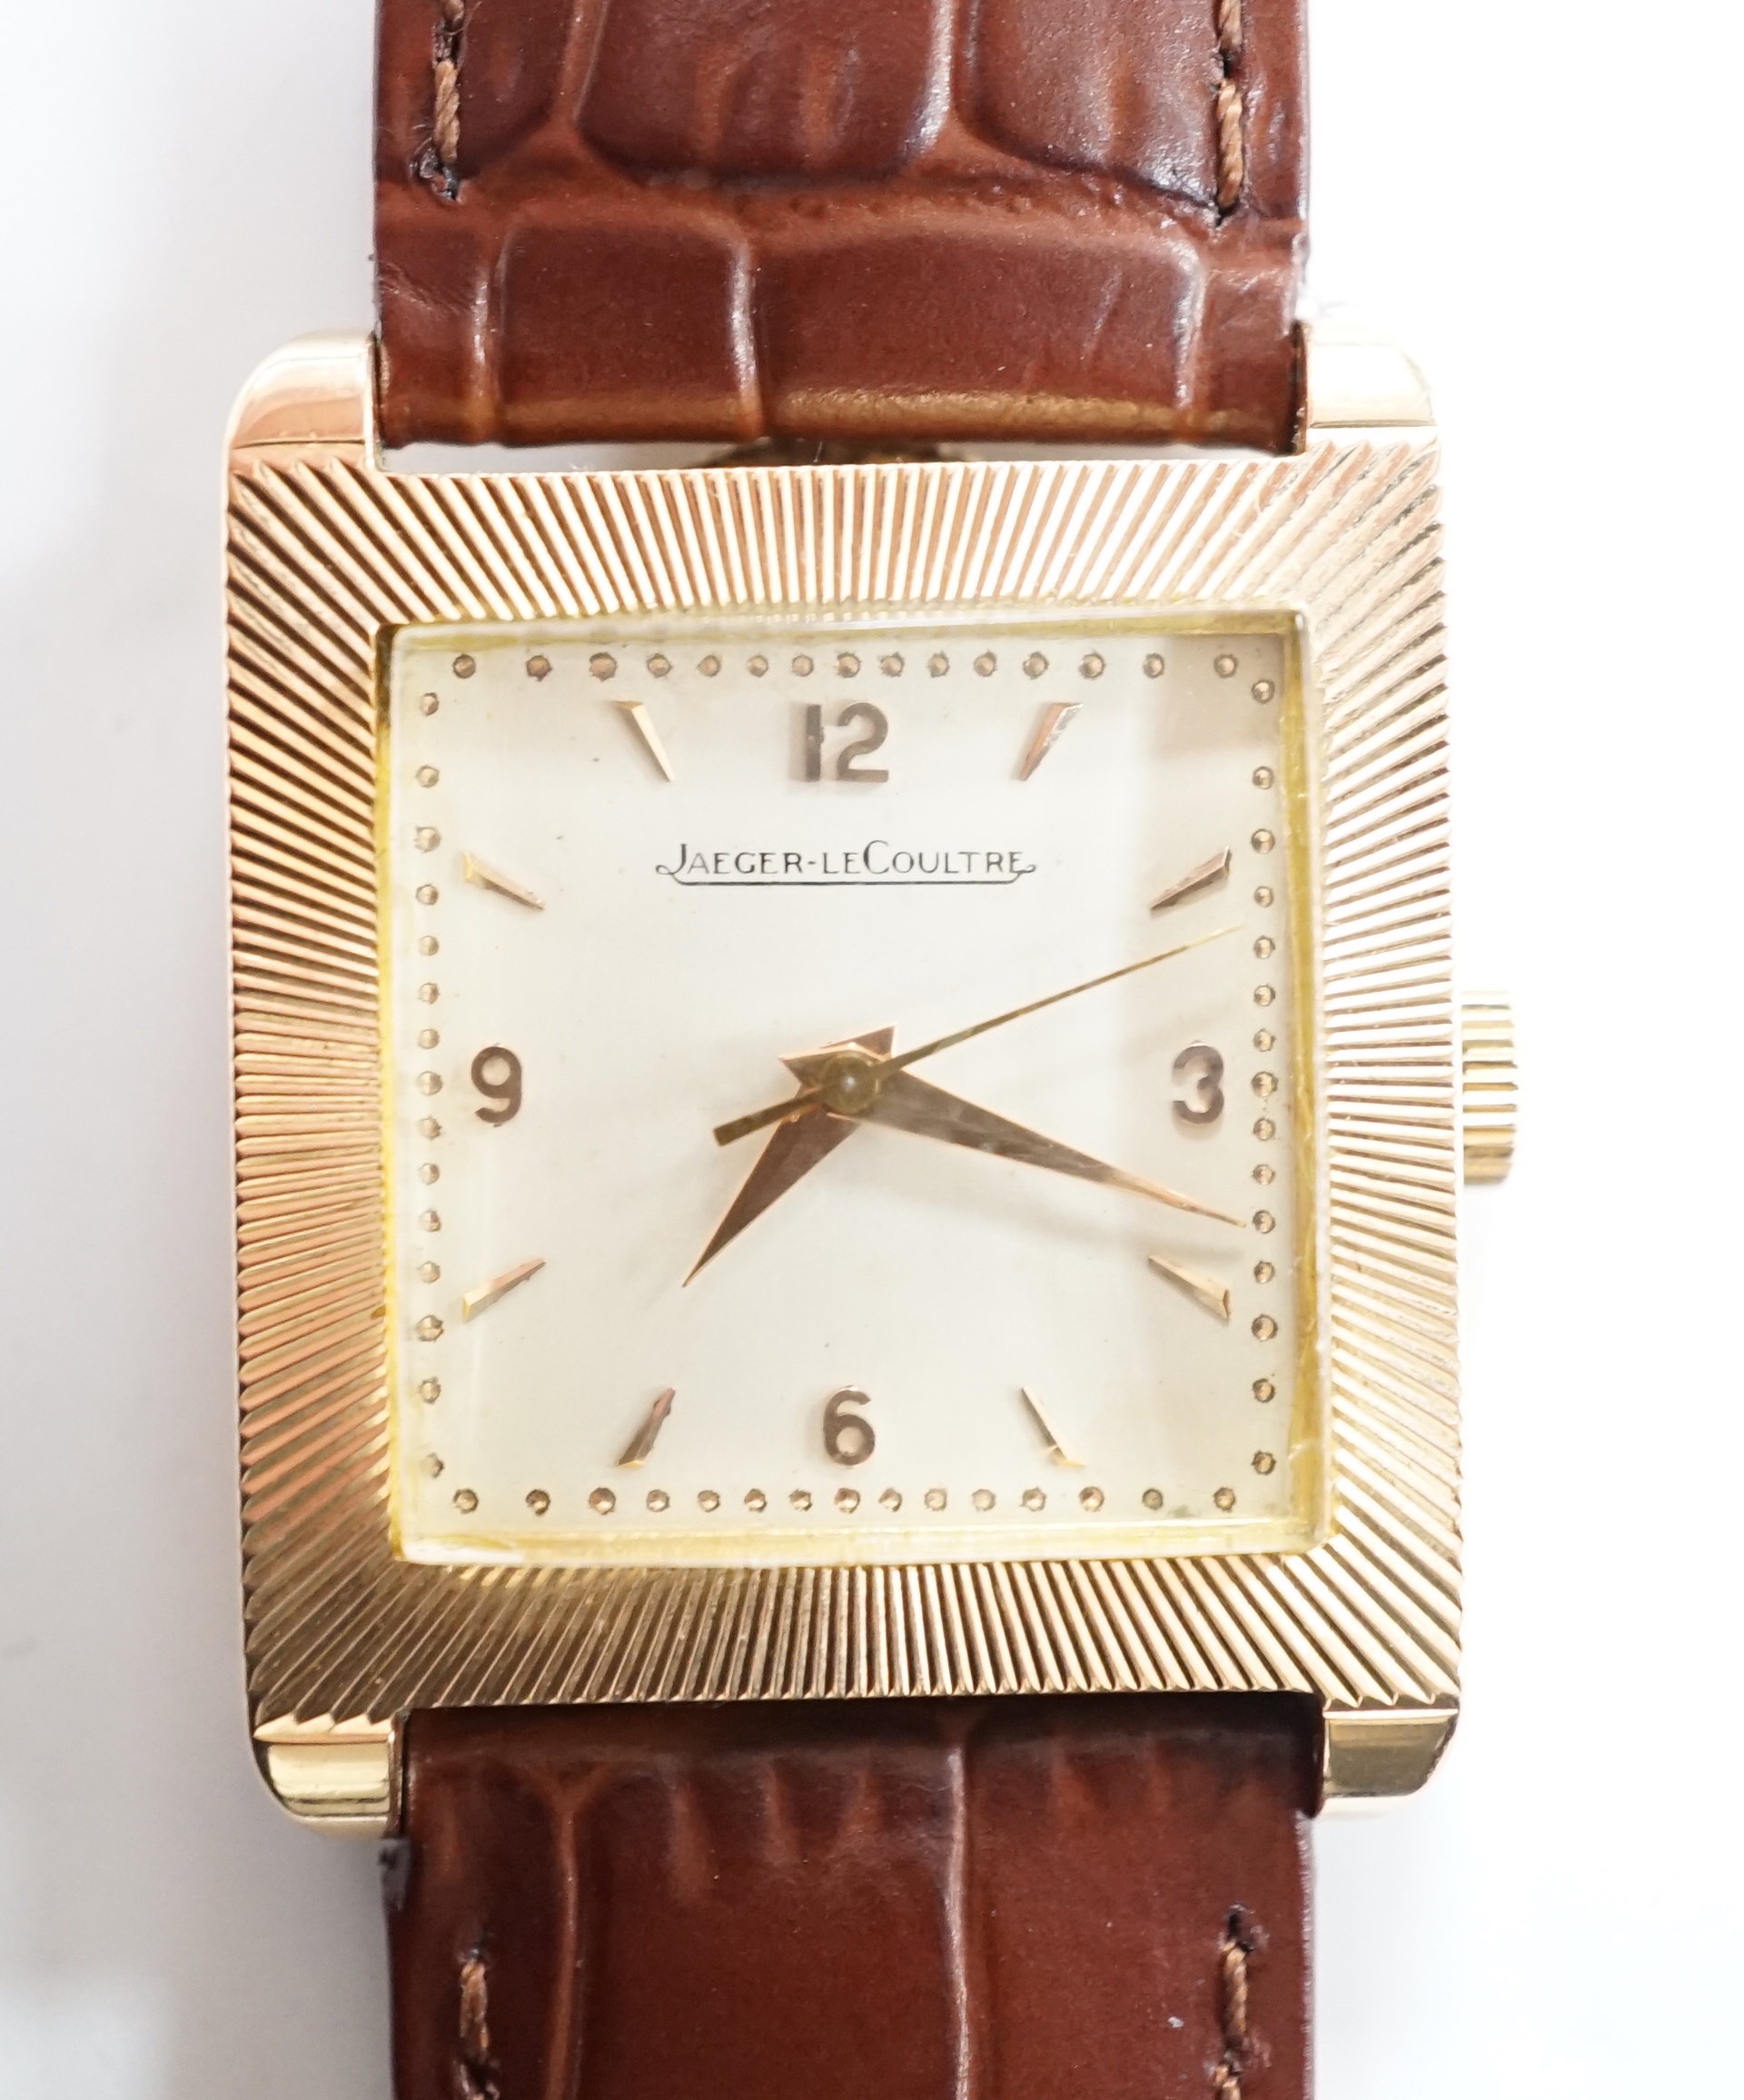 A gentleman's 18ct gold Jaeger LeCoultre manual wind dress wrist watch, with square dial, milled bezel and baton and quarterly Arabic numerals, on associated leather strap, case diameter 26mm, gross weight 31.8 grams.